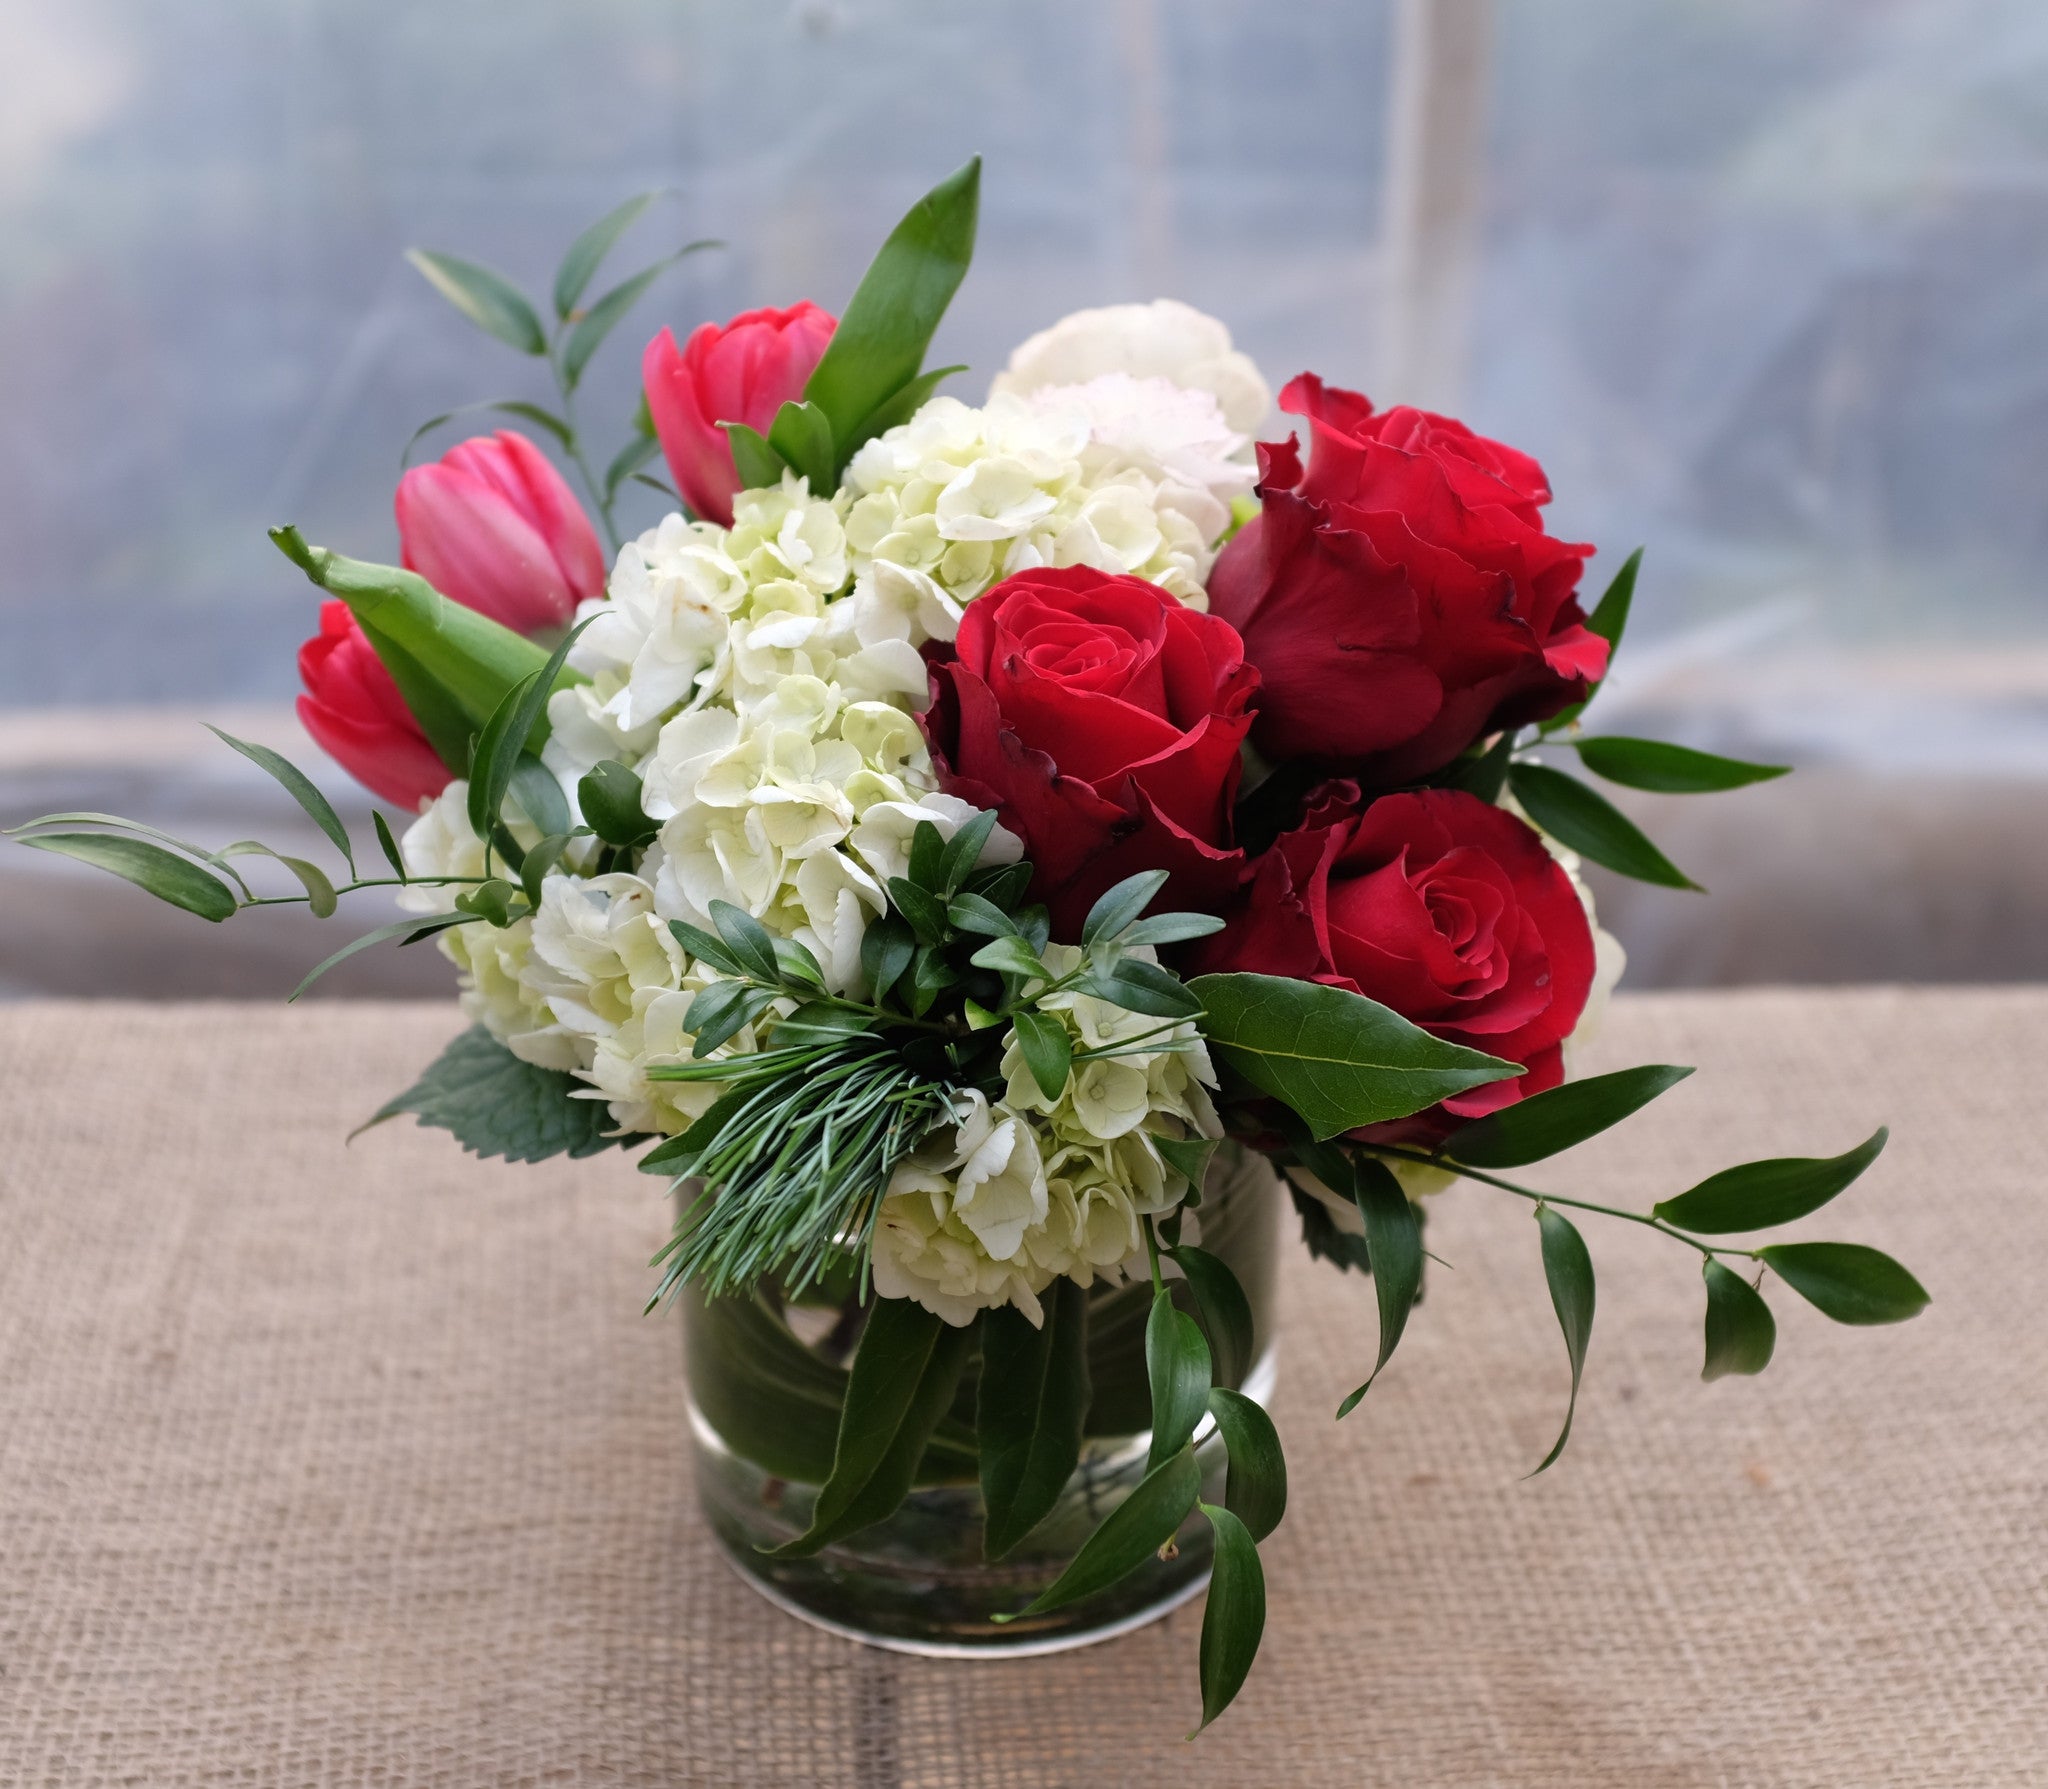 Small Valentine's Flower Arrangement with Red Roses and Tulips | Michler's Florist